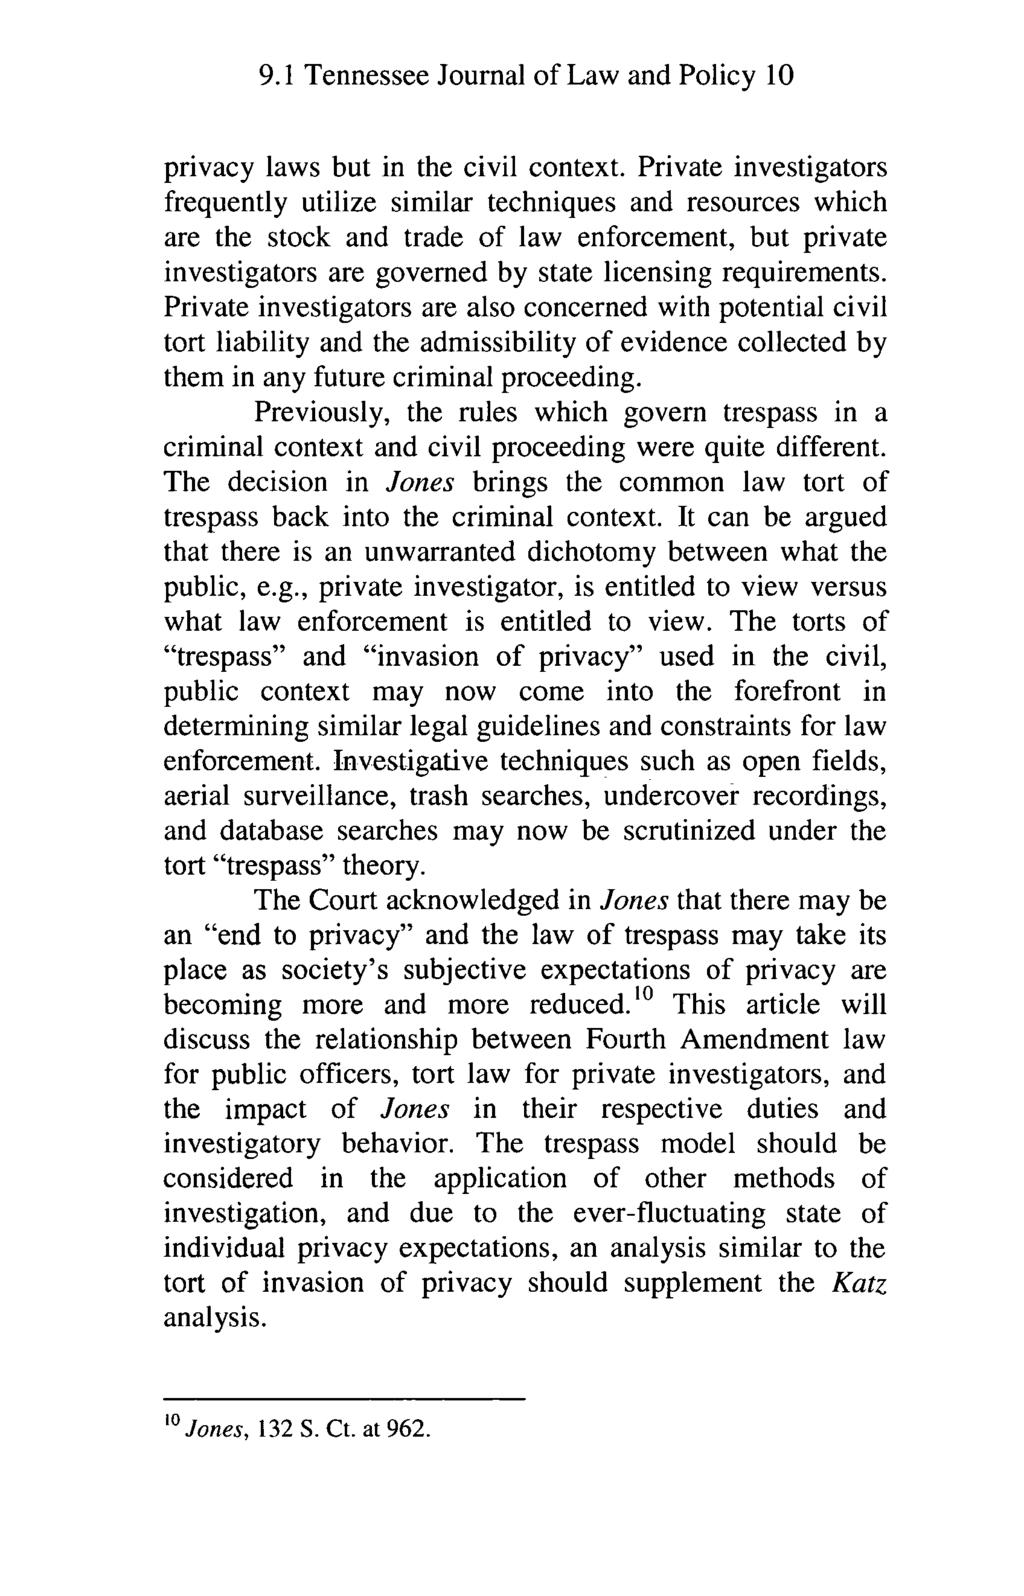 Tennessee Journal of Law and Policy, Vol. 9, Iss. 1 [2013], Art. 3 9.1 Tennessee Journal of Law and Policy 10 privacy laws but in the civil context.